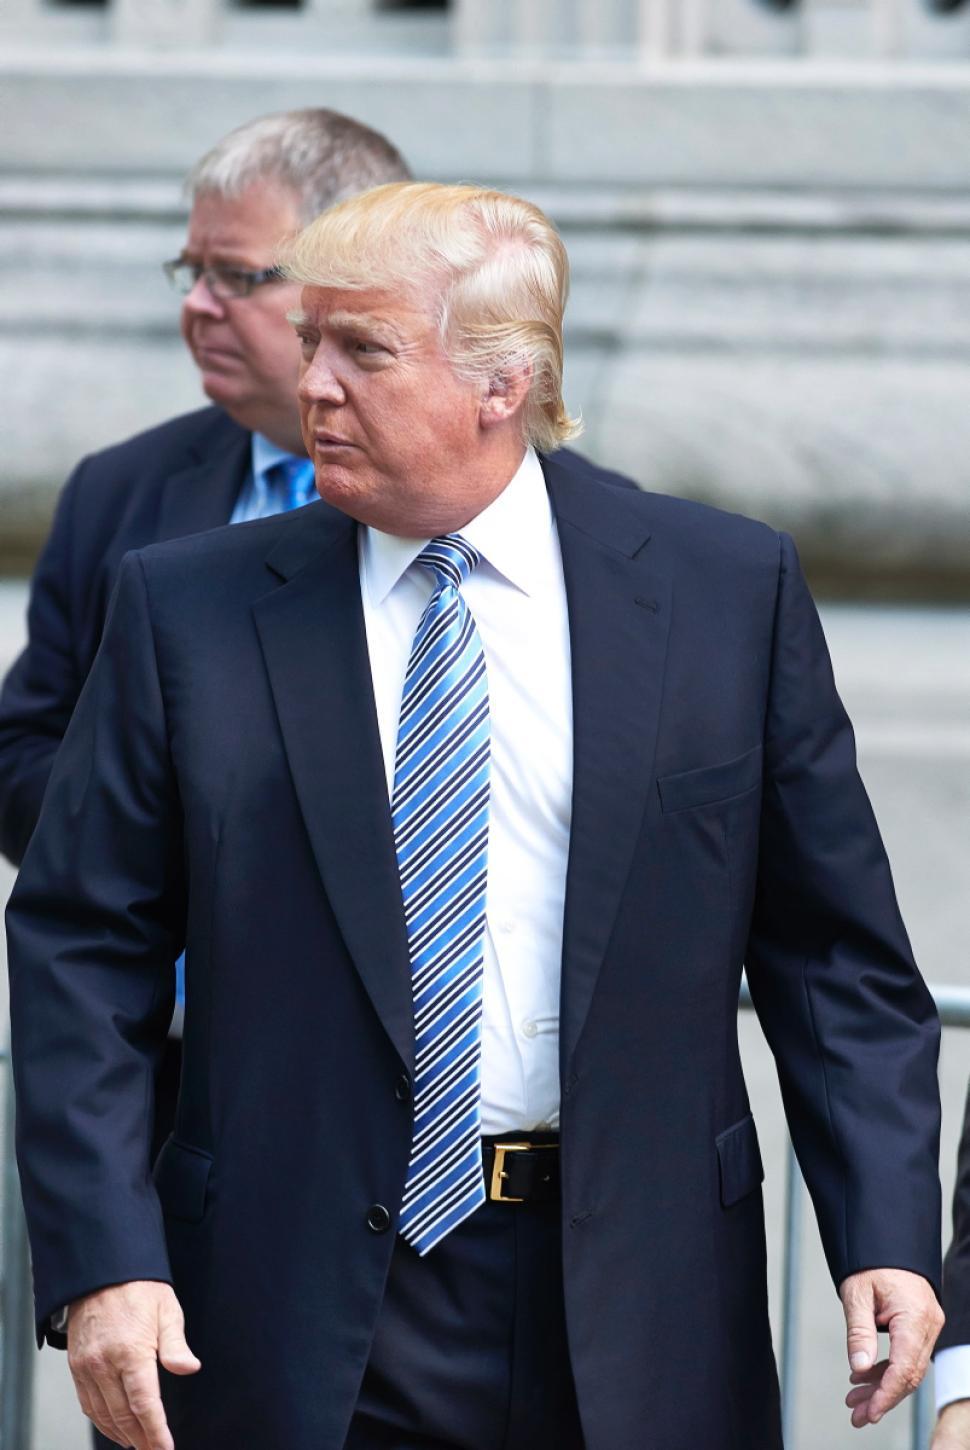 What’s Up with Donald Trump’s Suits?